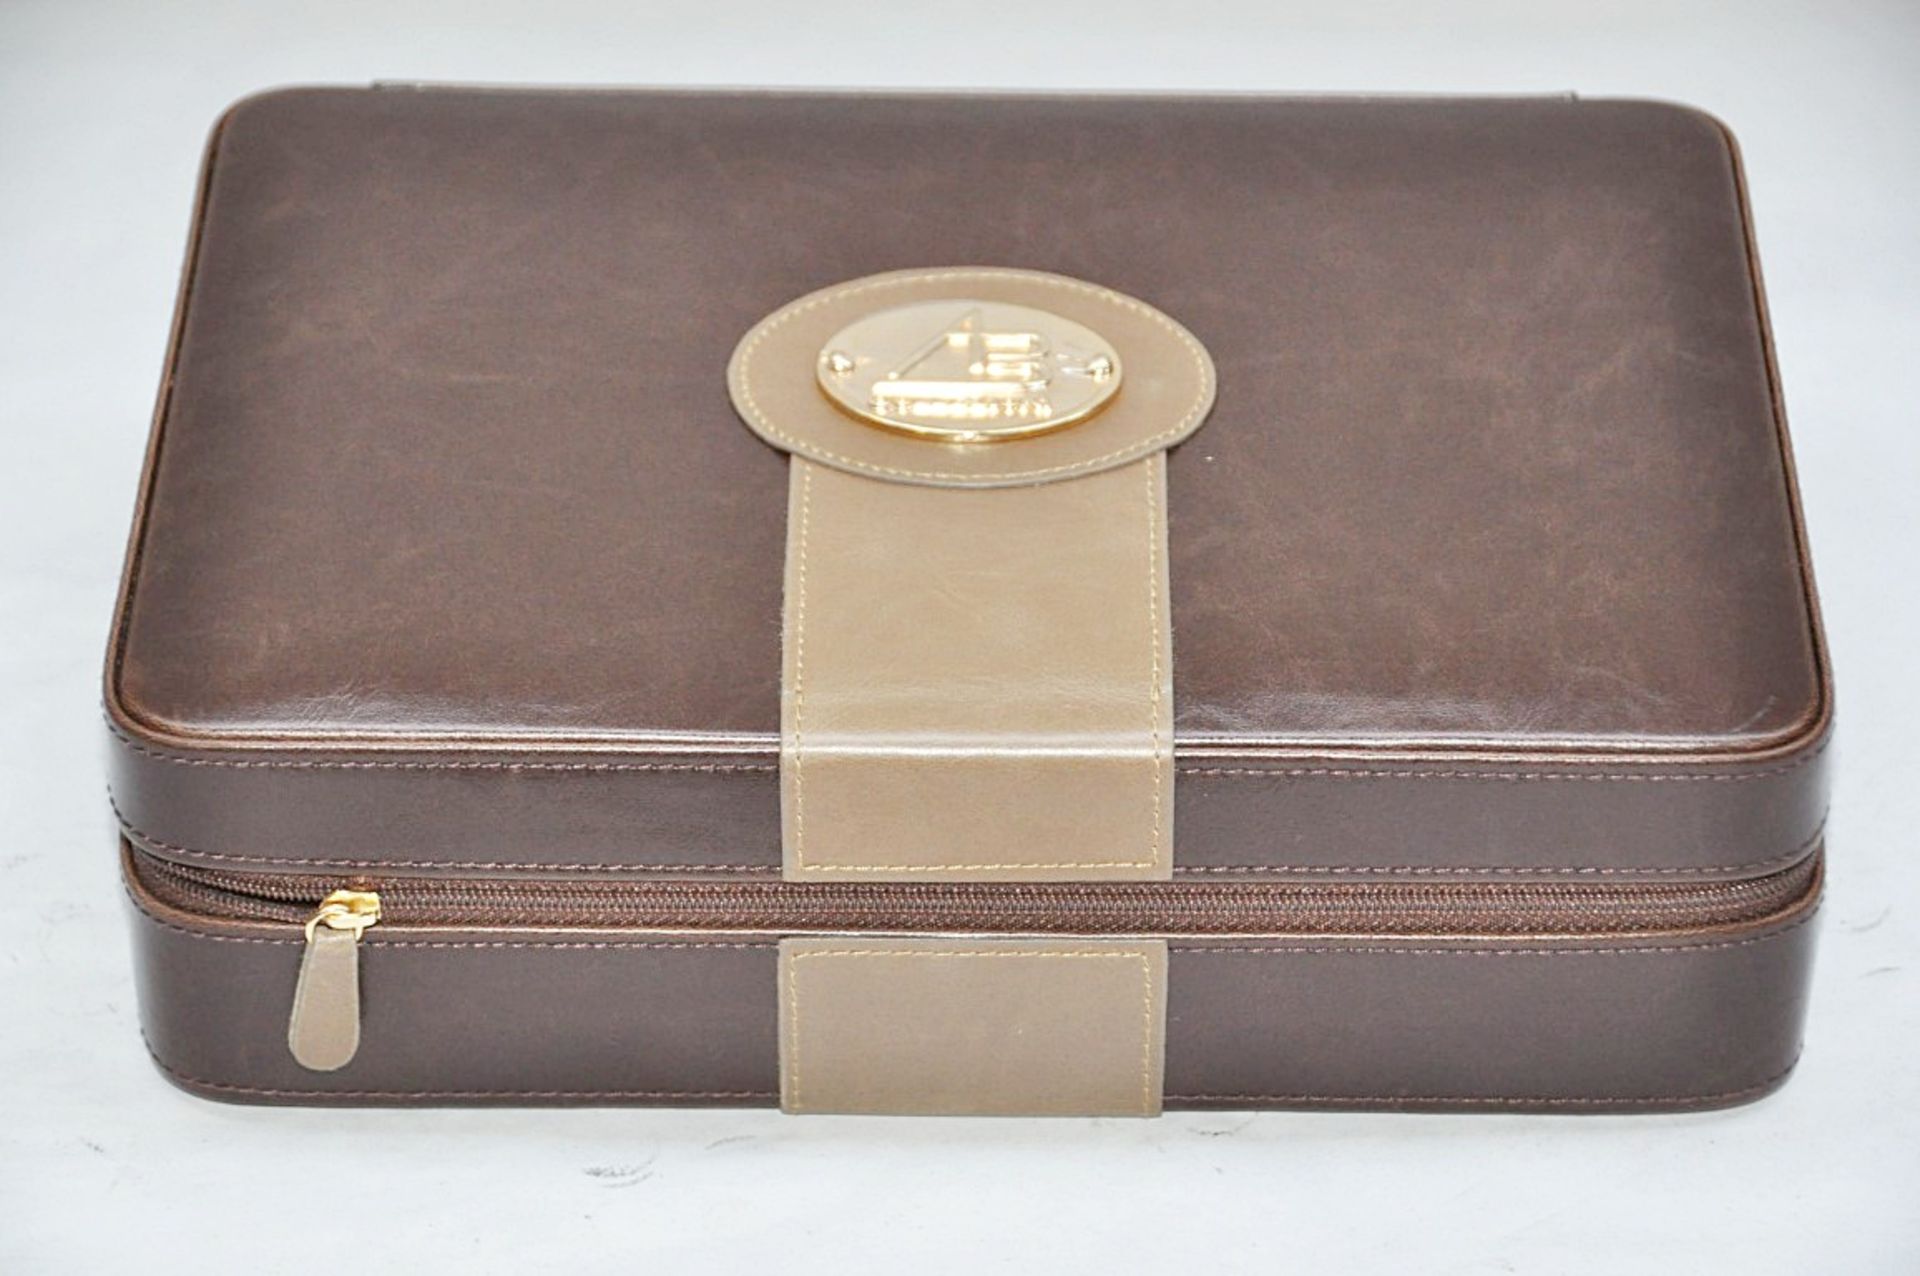 1 x "AB Collezioni" Italian Genuine Leather-Bound Luxury POKER SET (34047) - Ref LT006A - Features A - Image 3 of 9